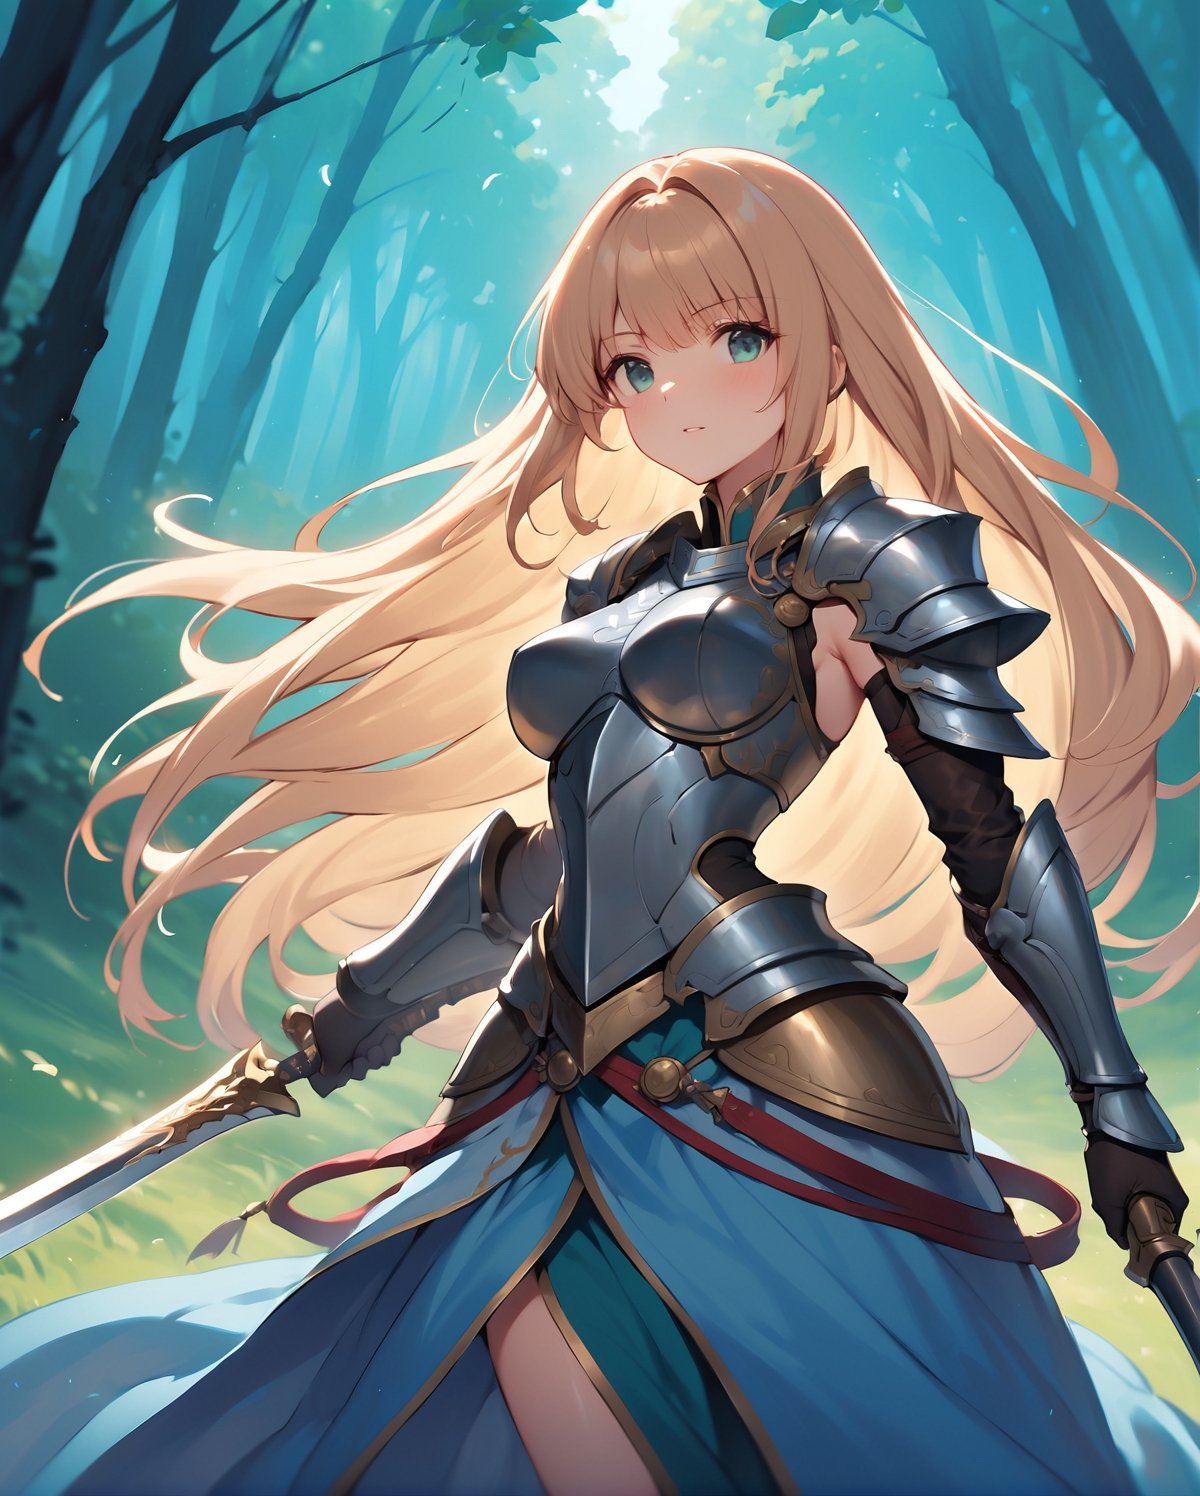 Envision an anime illustration reminiscent of medieval Europe, featuring a formidable female swordswoman in the role of a knight. Picture her clad in authentic medieval armor, with intricate detailing that reflects the craftsmanship of the era. Visualize the female warrior wielding a finely crafted sword, poised for battle with a backdrop reminiscent of a medieval landscape – perhaps a castle in the distance or a mist-shrouded forest. Capture the essence of her strength and resilience in the determined expression on her face, illuminated by the soft glow of filtered sunlight. Craft a visually compelling scene that transports viewers to an anime interpretation of the medieval European world, showcasing the prowess and valor of this female knight.